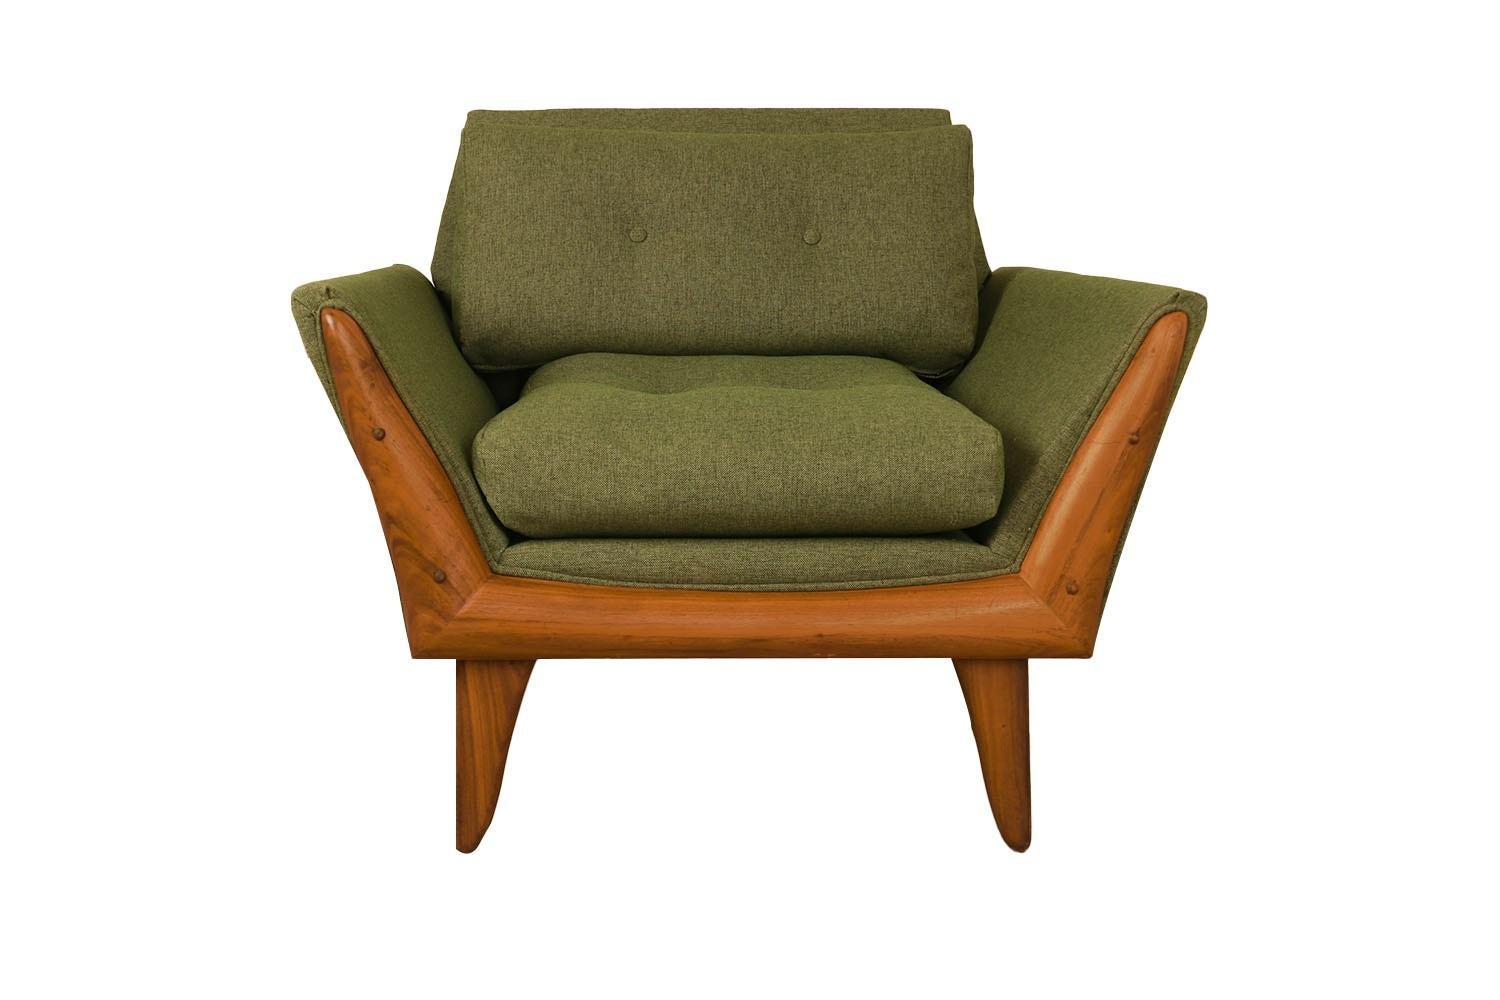 Mid-century modern stunning, beautiful, high quality walnut framed lounge chair model 2406-C, designed by Adrian Pearsall for Craft Associates.  In new upholstery fabric and high-density foam. An exceptional chair both for its form and quality, it